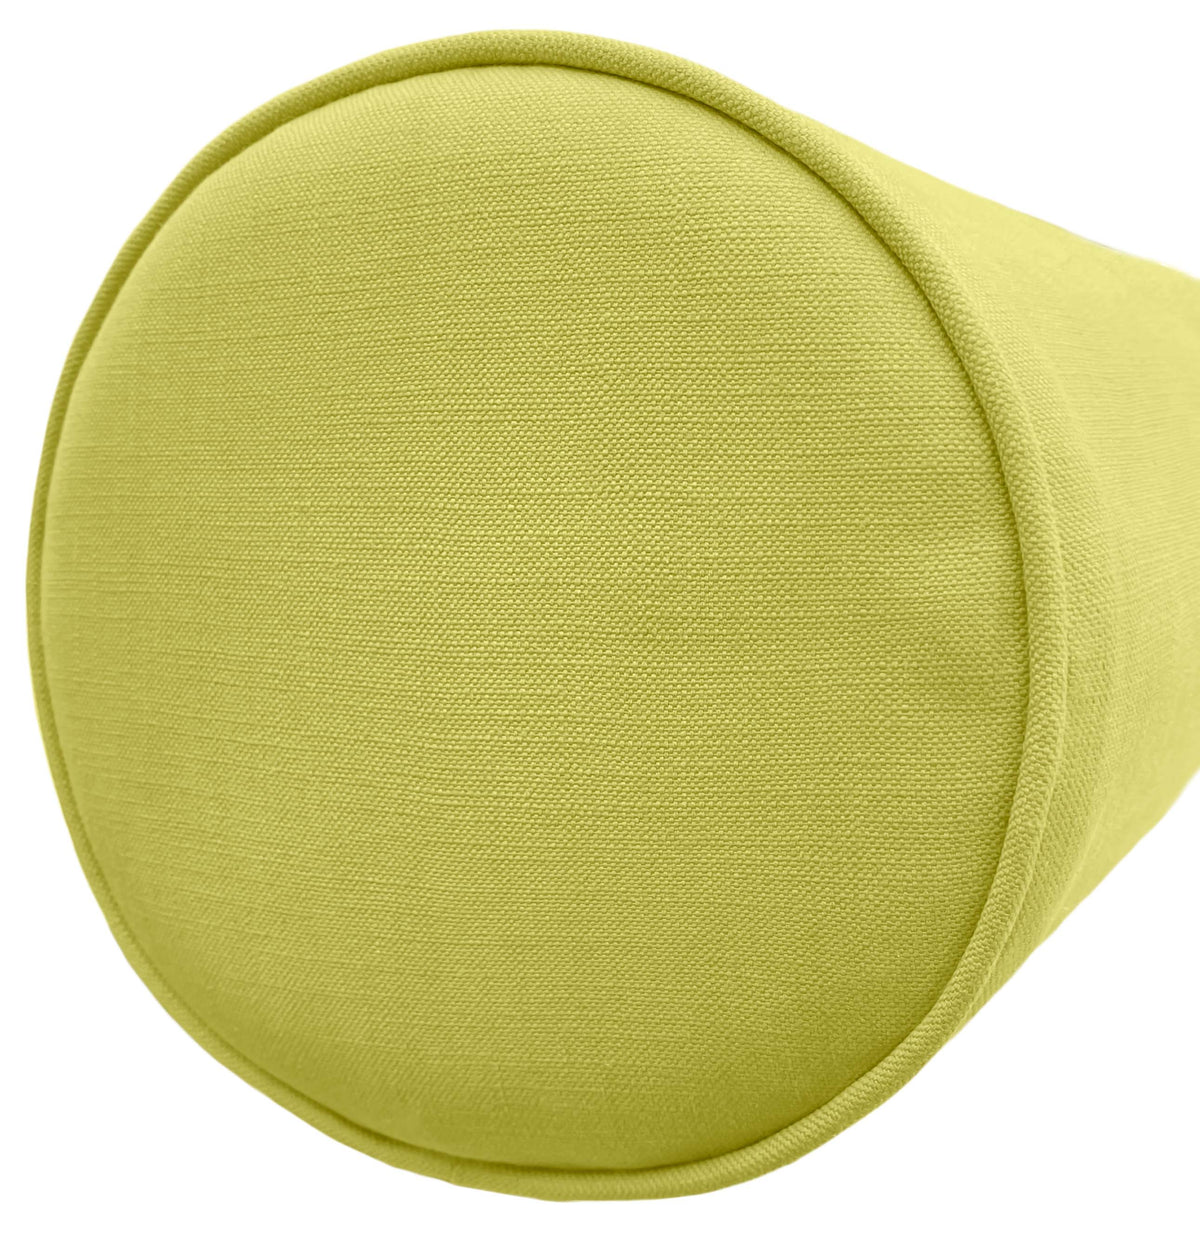 THE BOLSTER :: CLASSIC LINEN // CHARTREUSE